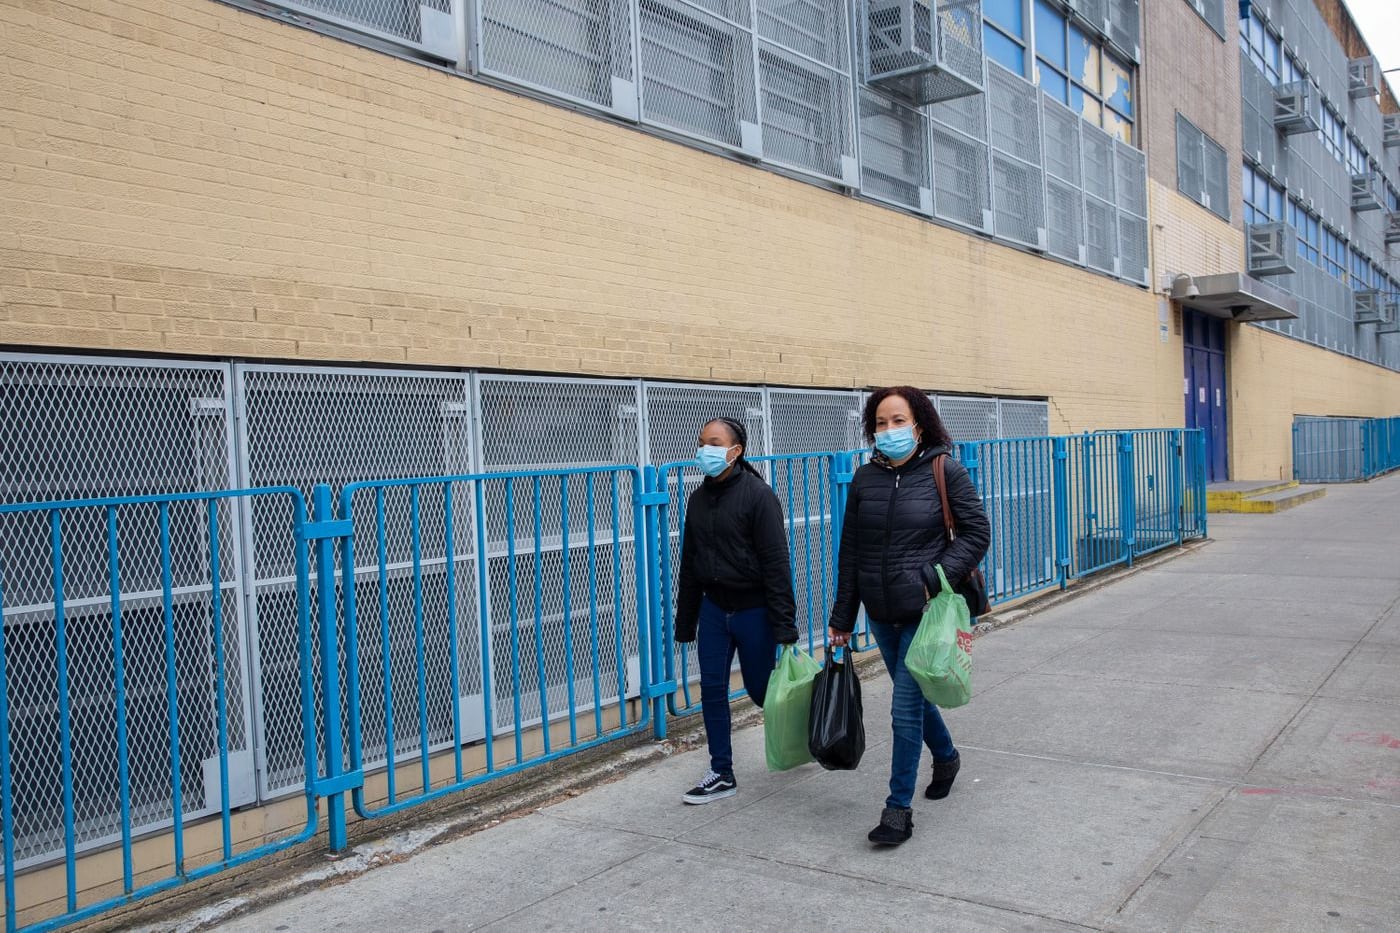 The Laboratory School of Finance and Technology and South Bronx Preparatory in Mott Haven was closed in March after a student tested positive for the coronavirus.